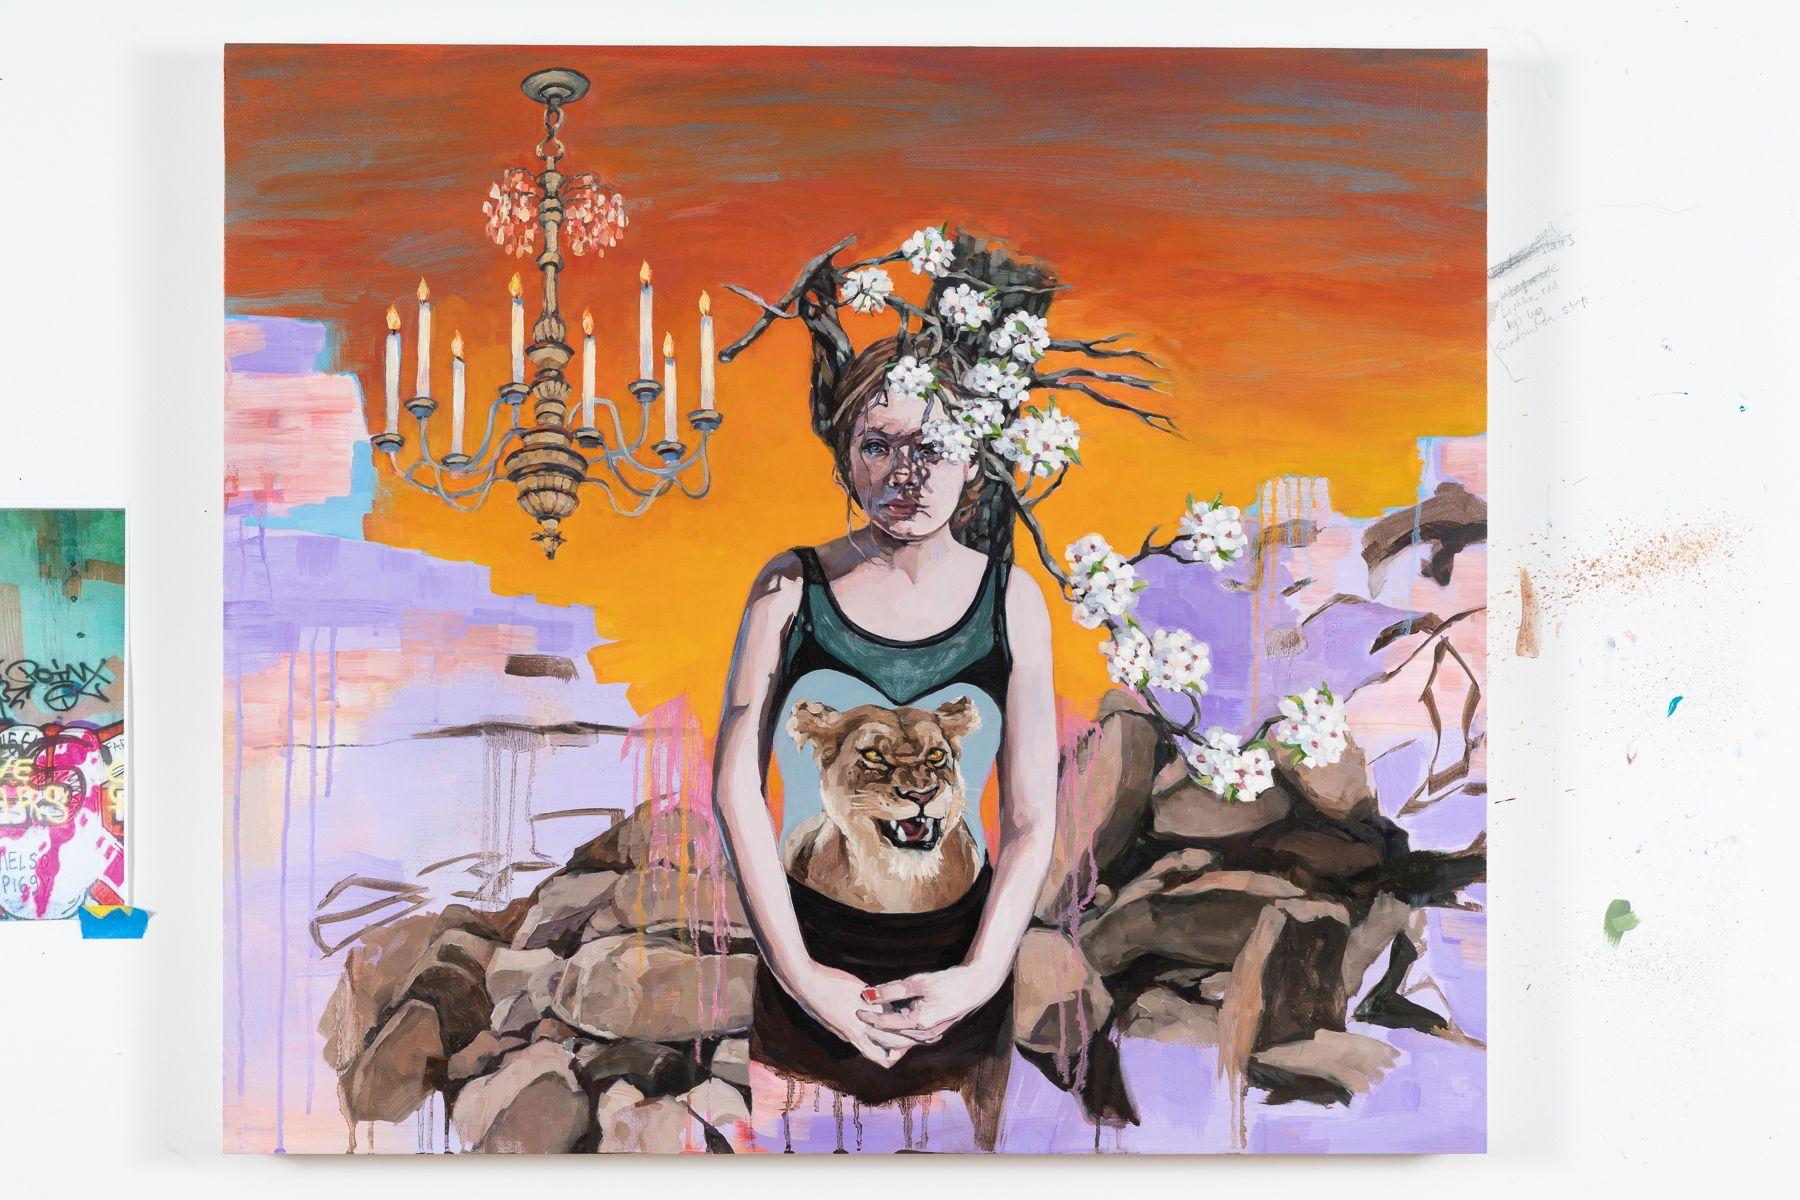 Sharon Shapiro layers elements from traditional American value sets, the artistic canon of the female nude, and surrealism to create her visual narratives. Her depictions of young women capture a transitional space in their development; they wield a